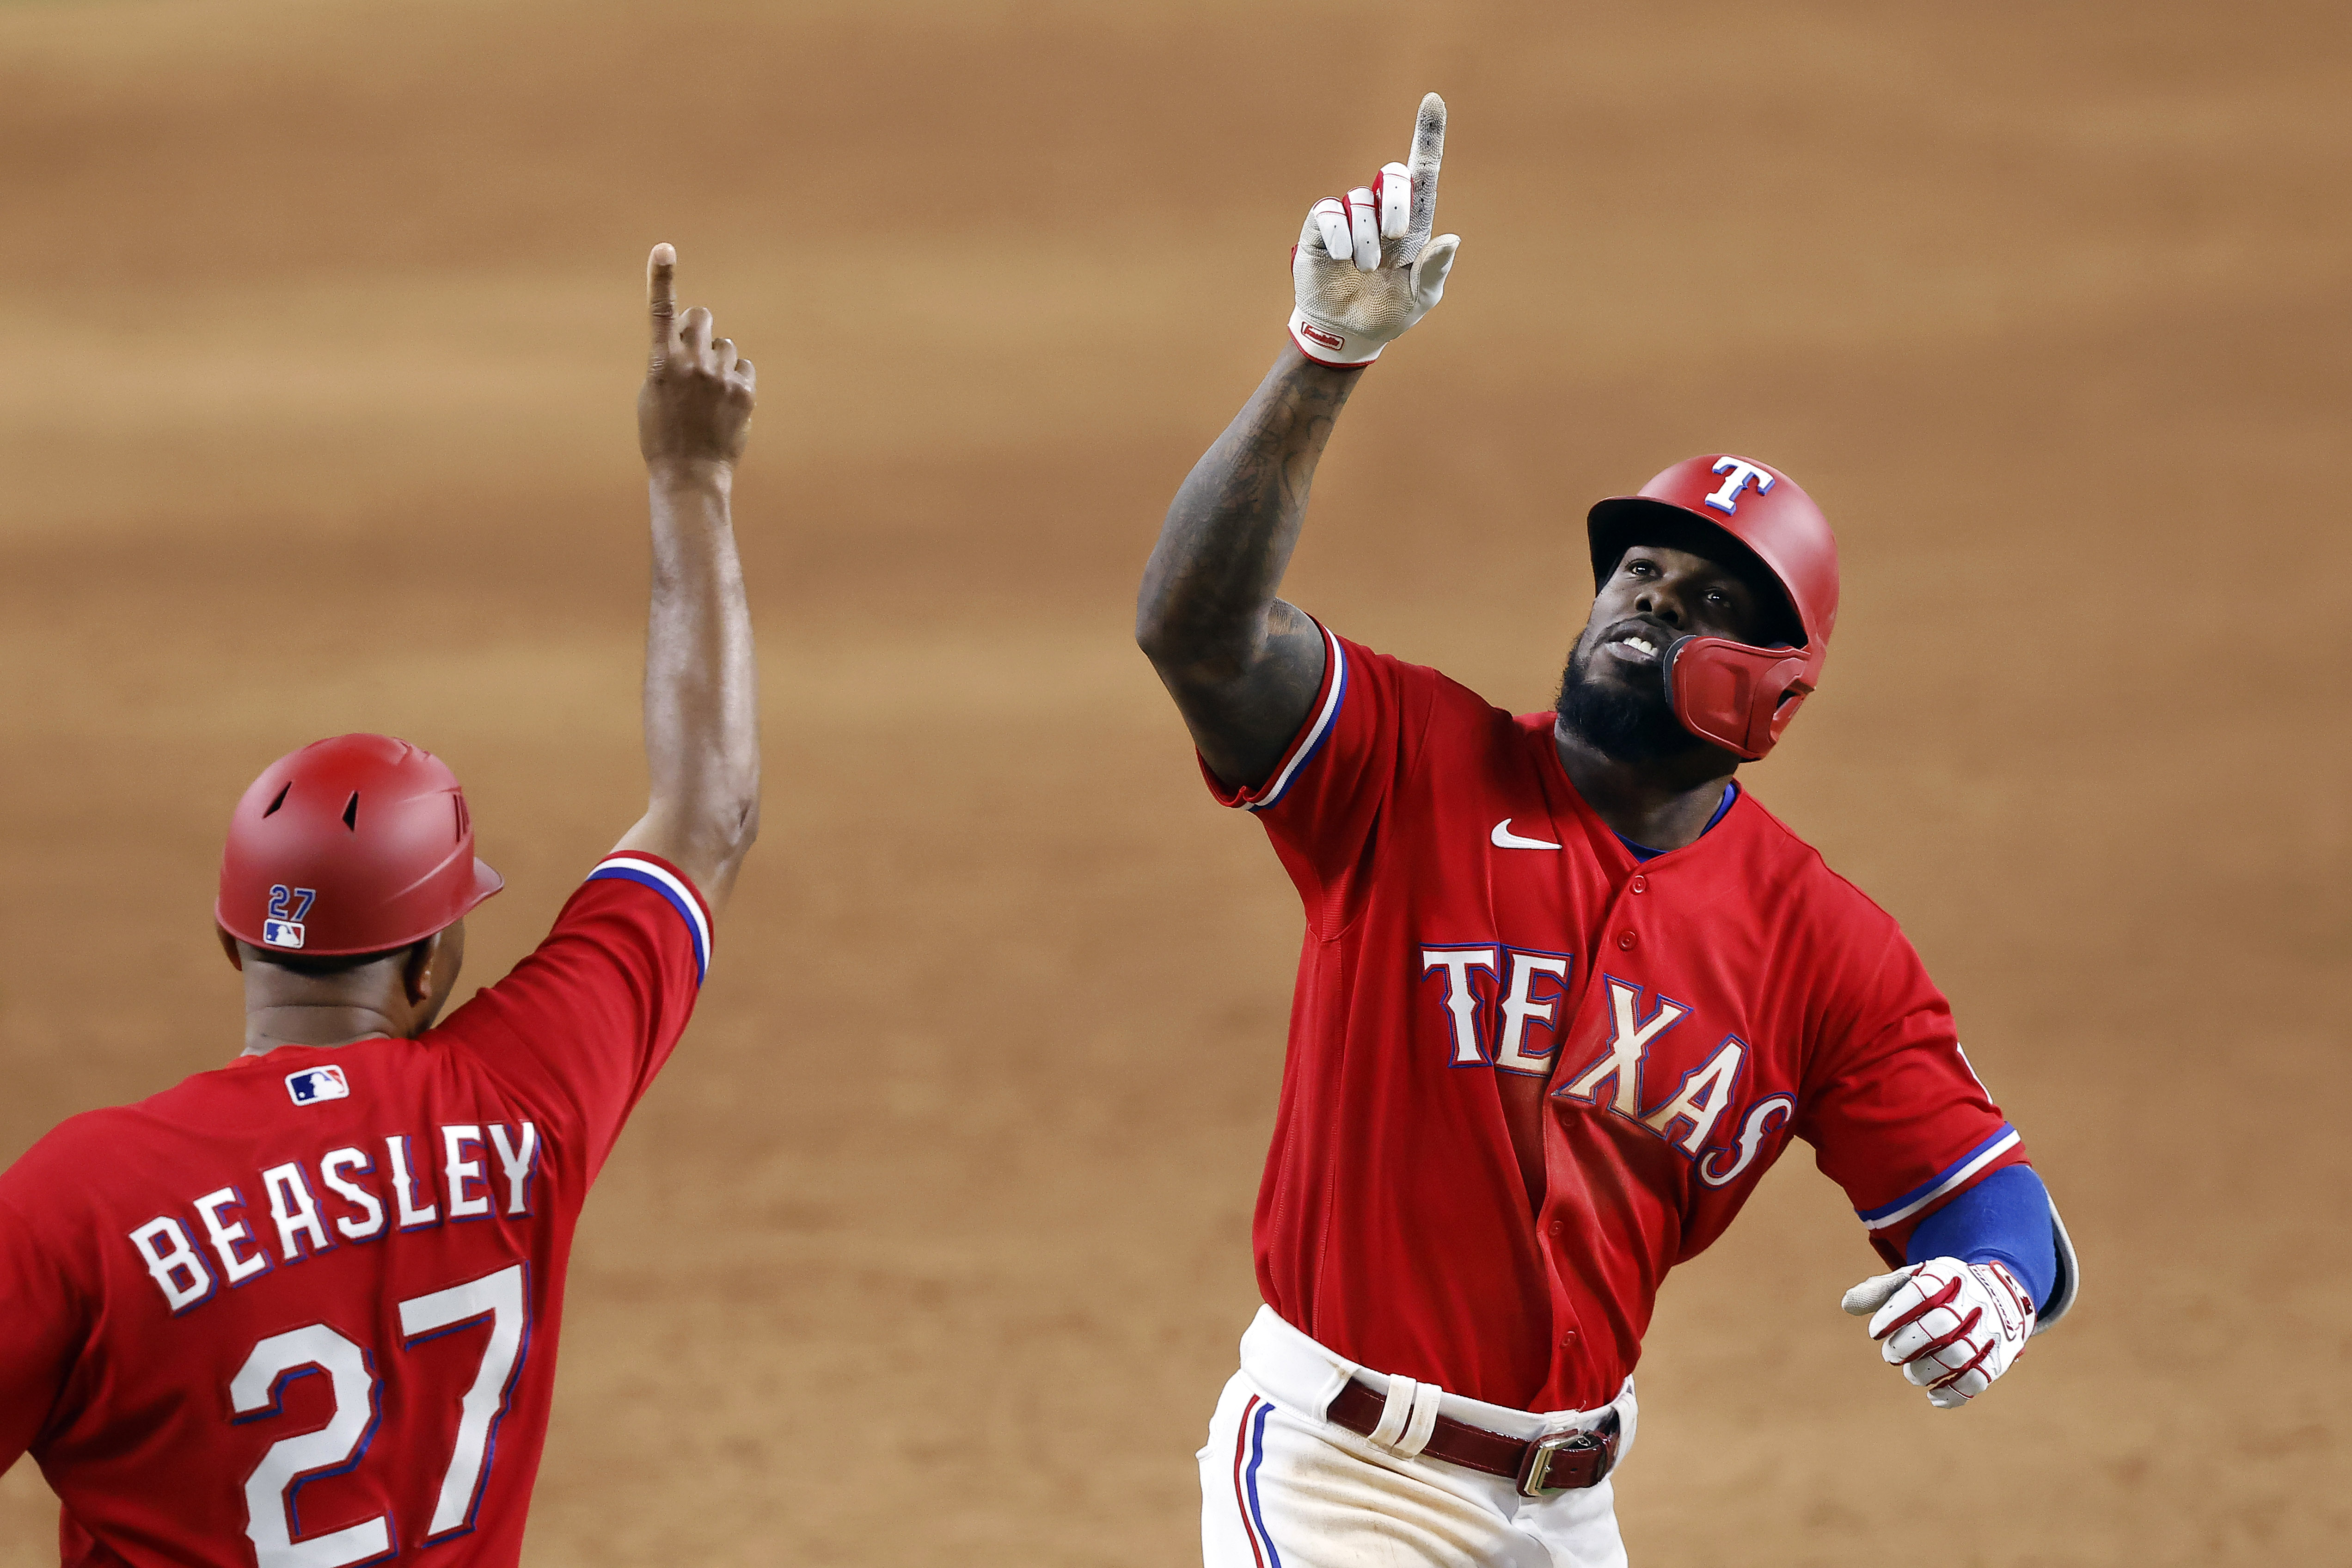 Adolis Garcia's extra-inning walk-off homer saved Rangers from